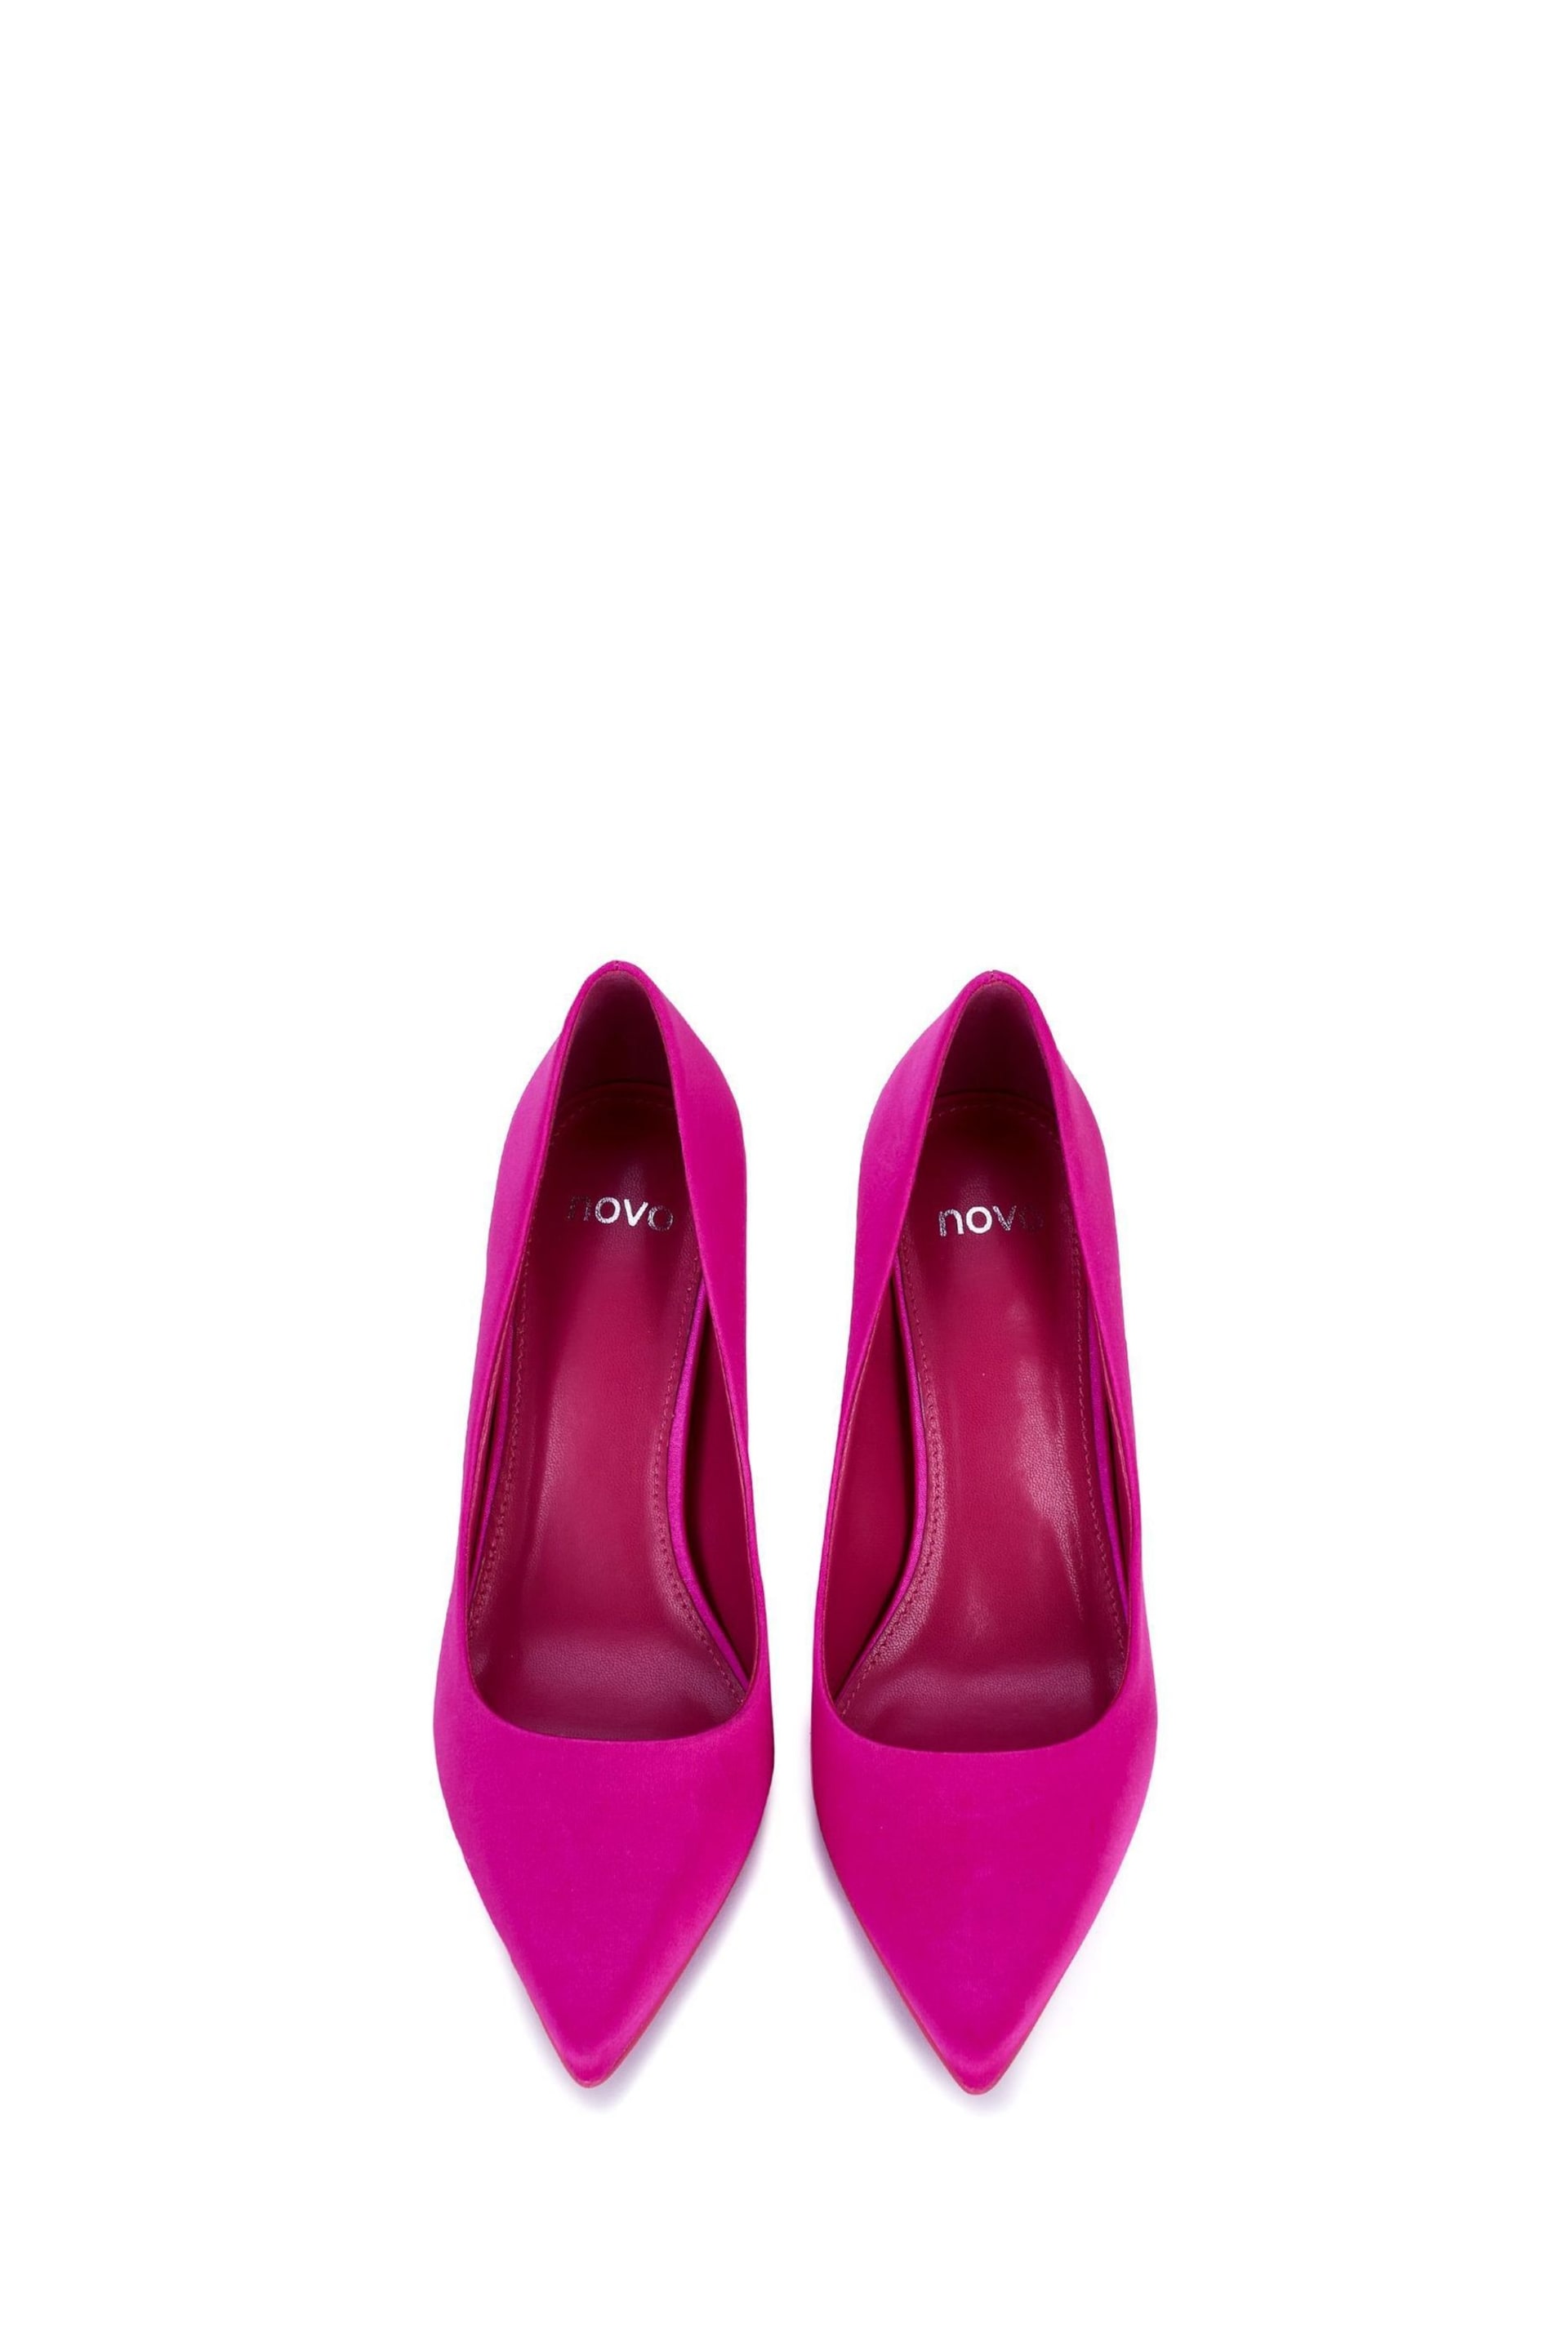 Novo Pink Crissy Court Shoes - Image 4 of 5